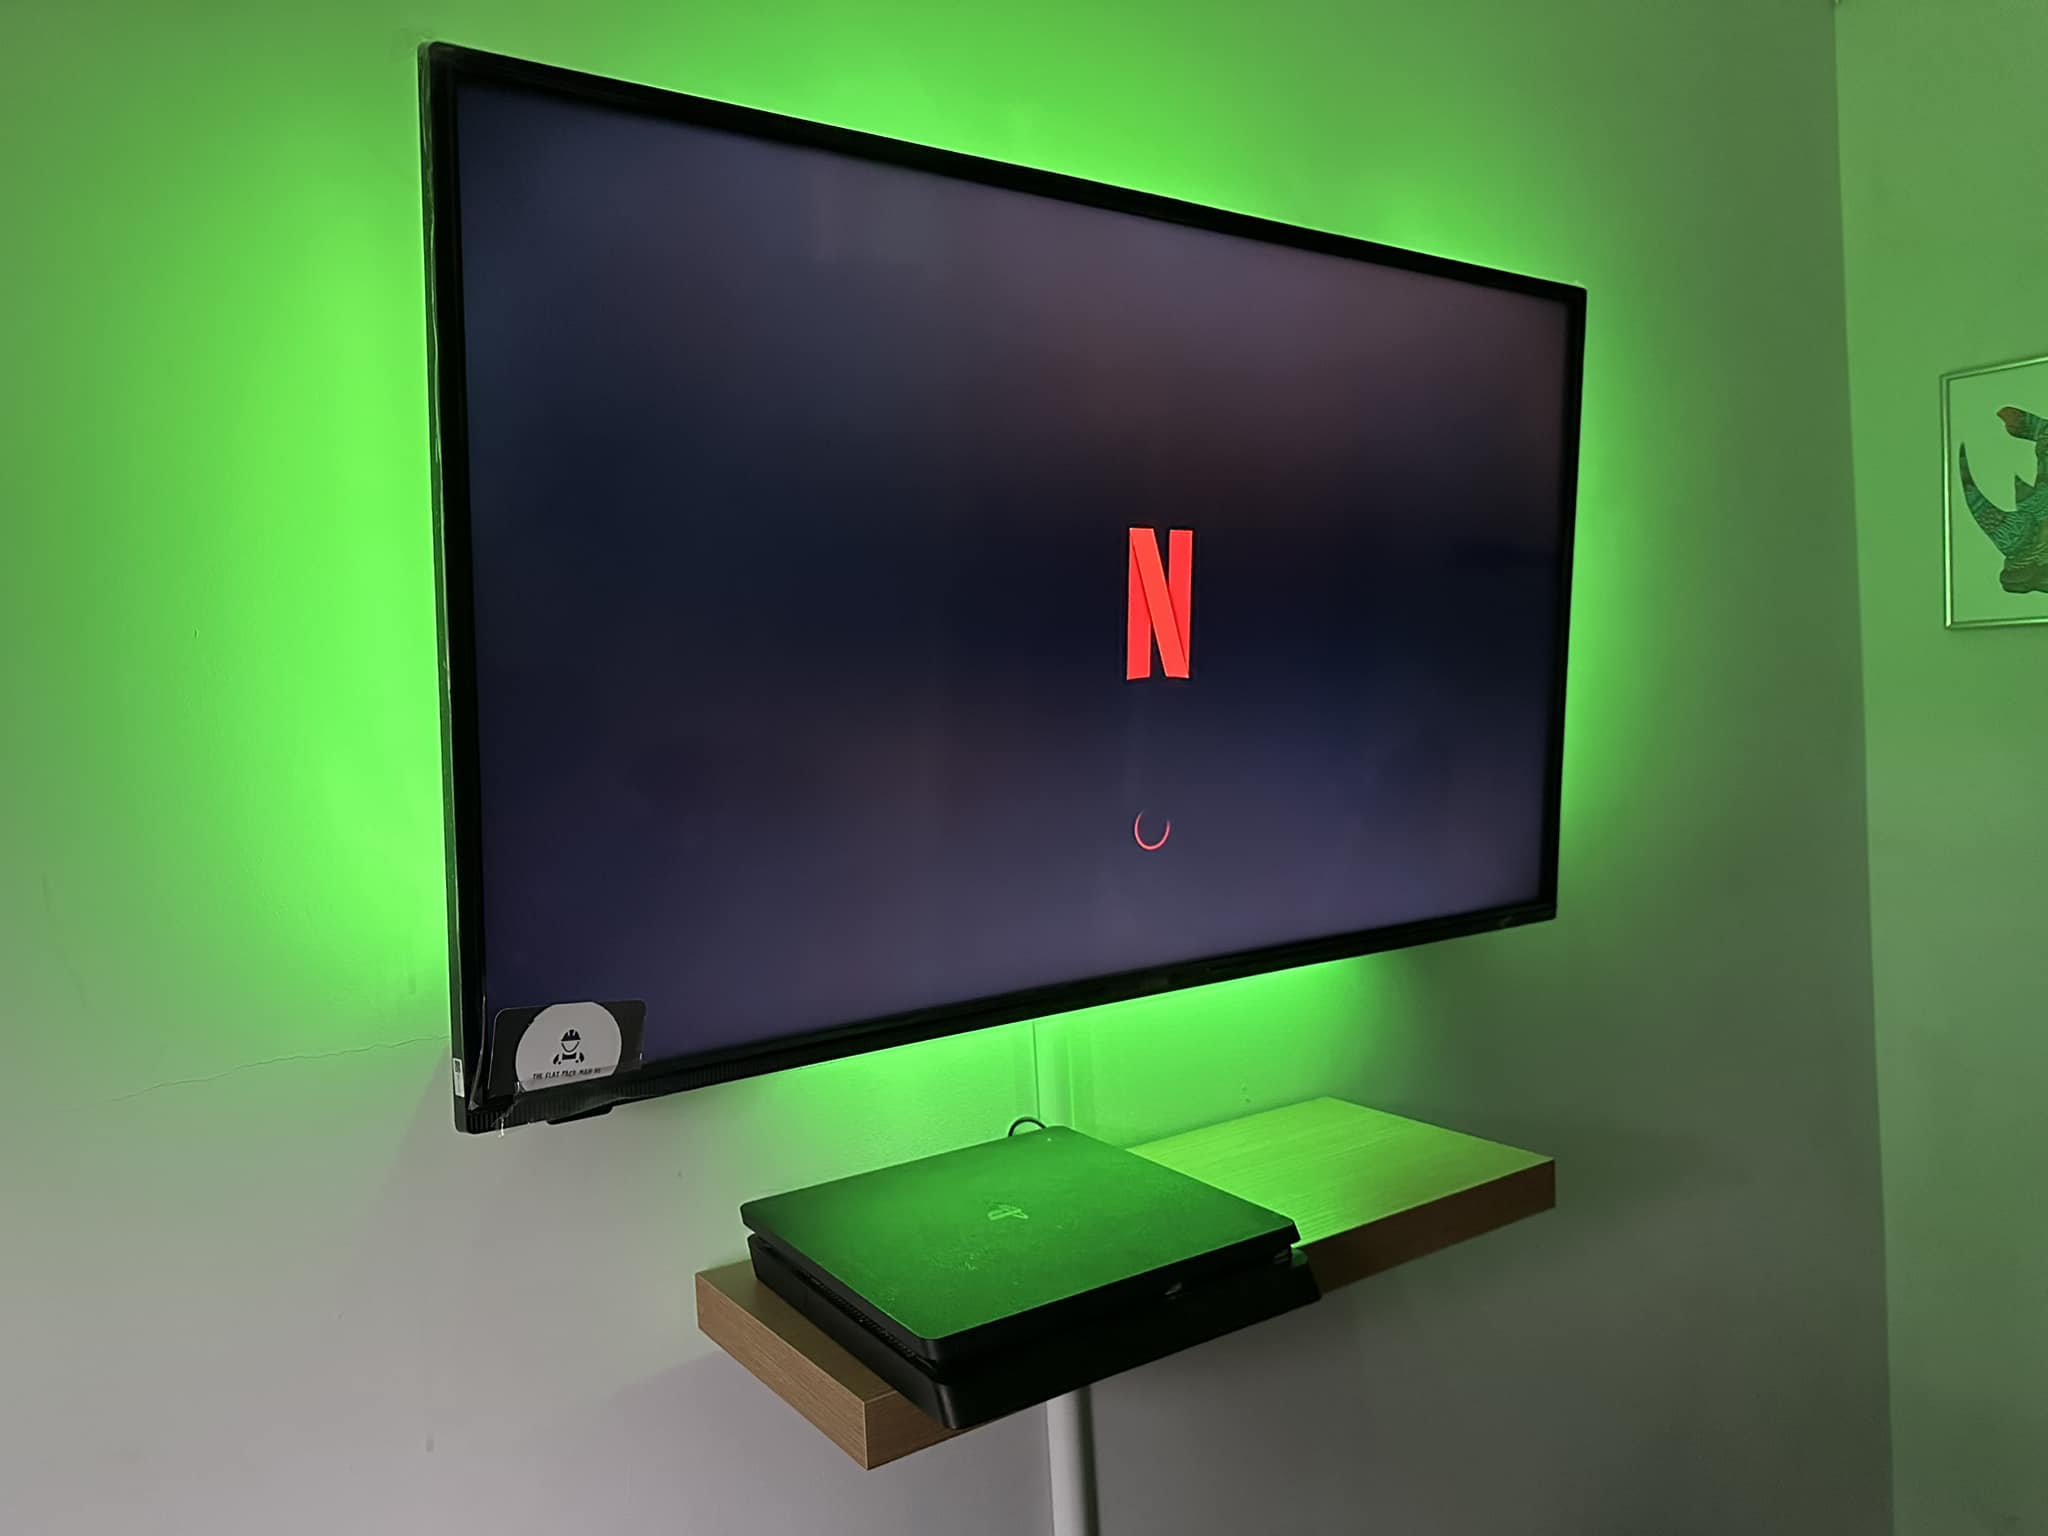 TV mounted on wall with green back light